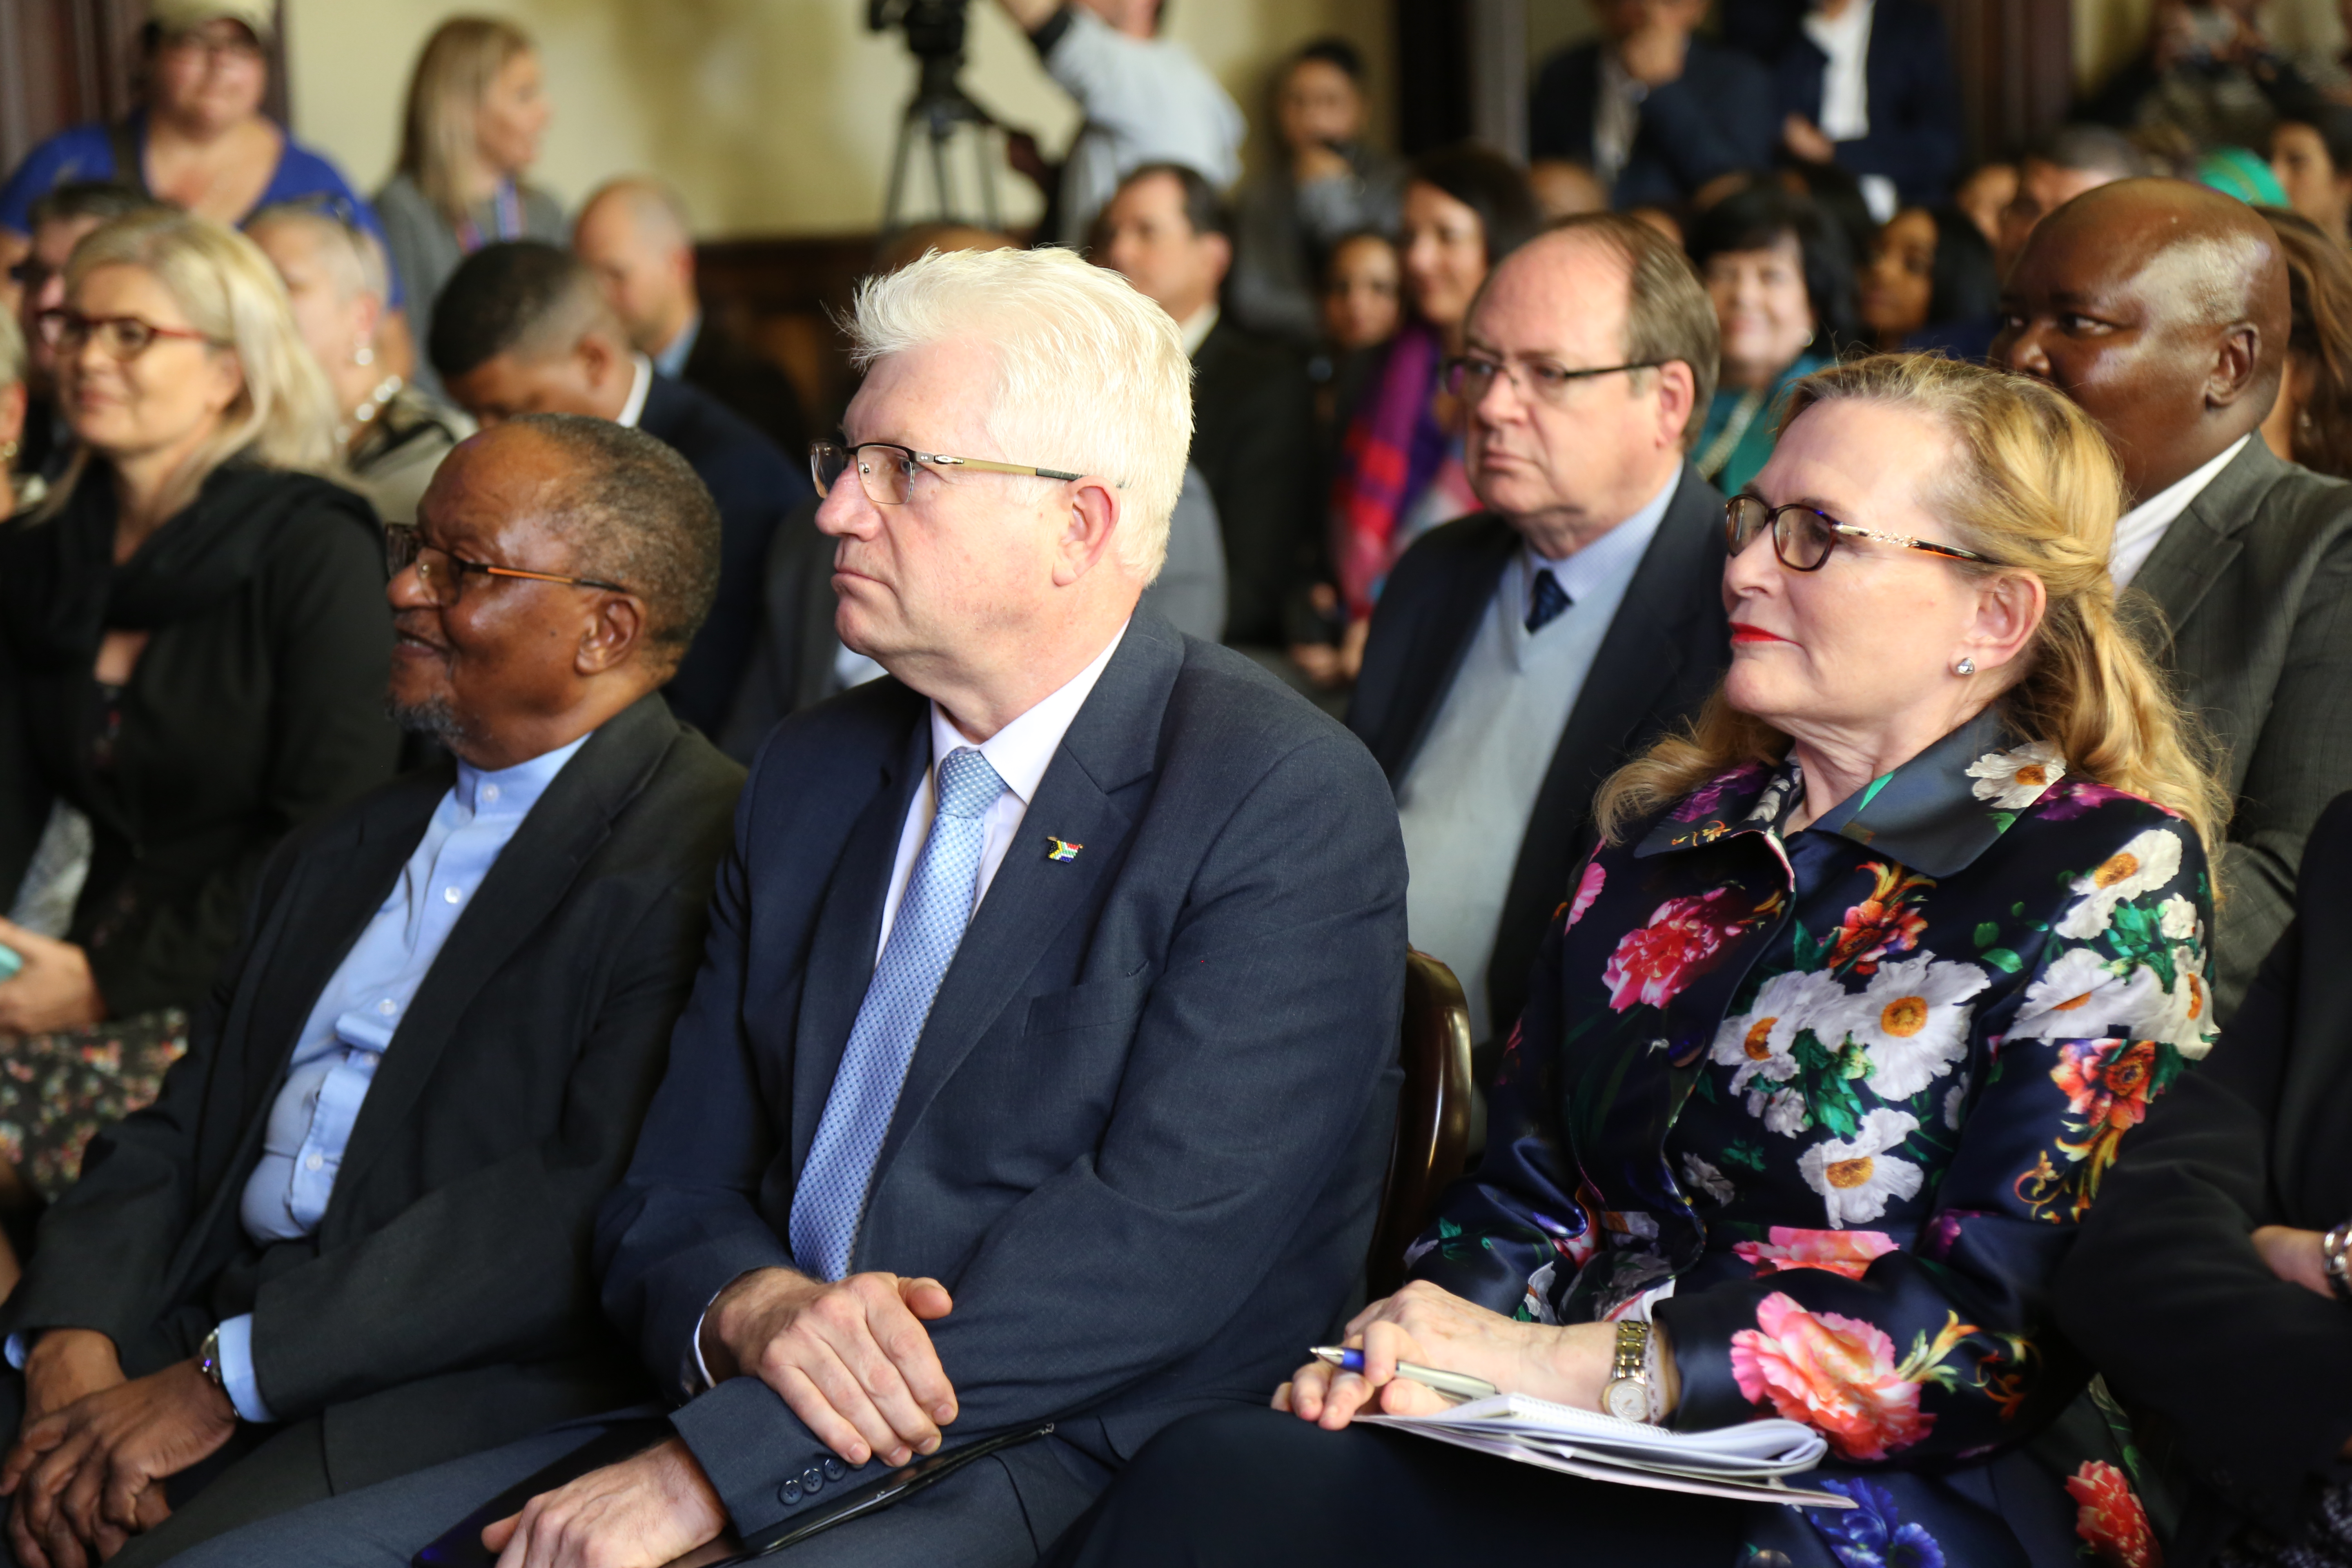 Professor Njabulo Ndebele, Minister Alan Winde and Premier Helen Zille at the Nelson Mandela statue unveiling